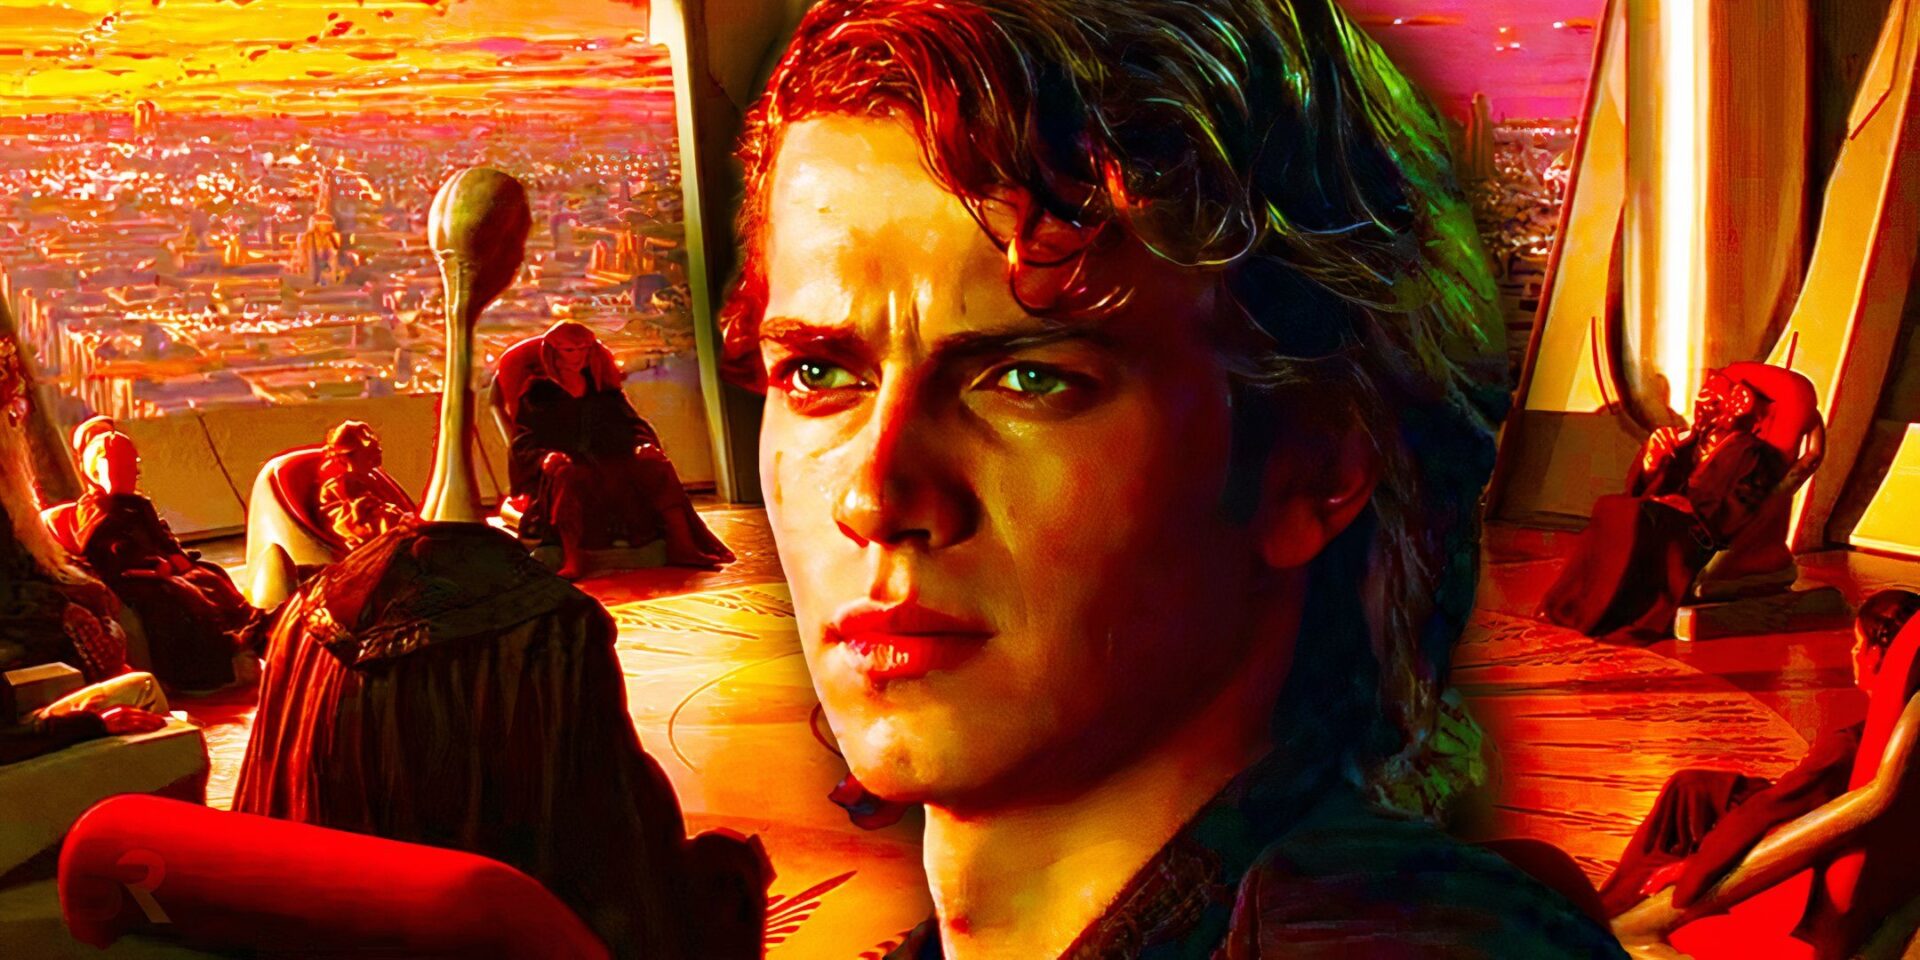 Star Wars Prequels: 5 Times The Jedi Council Underestimated Anakin Skywalker's Powers (& 5 Times They Were Right)